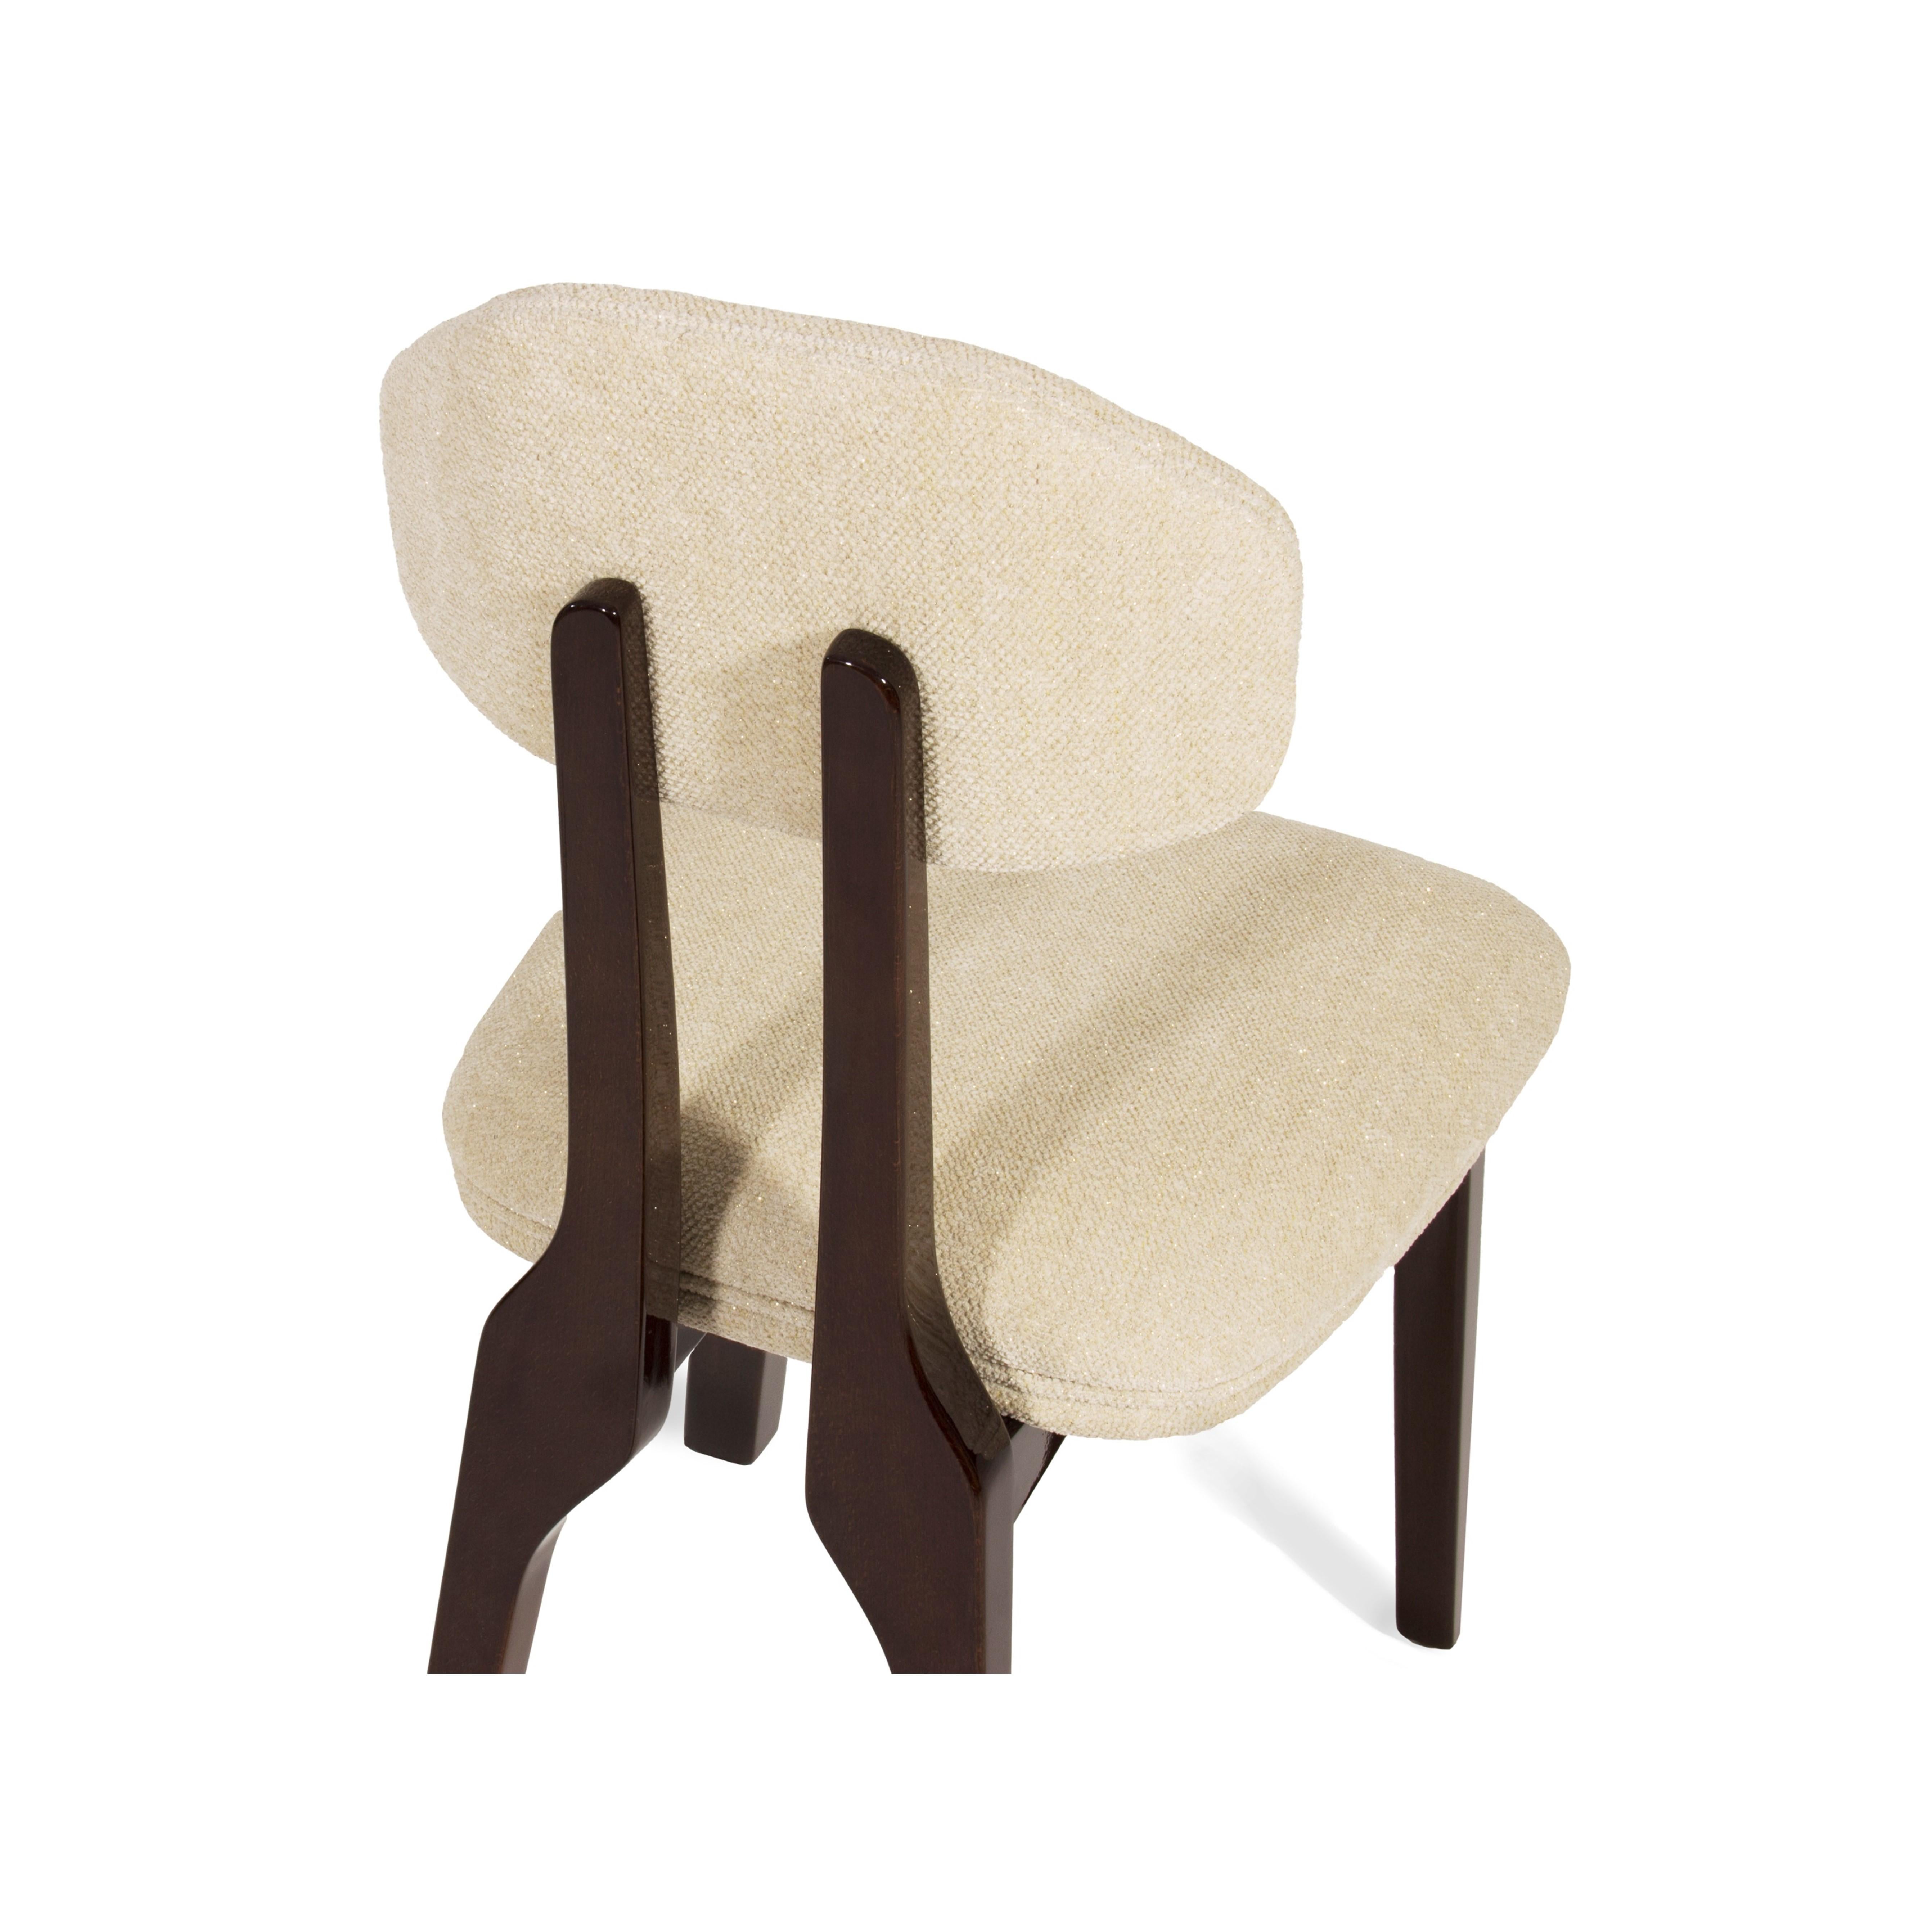 Silhouette Dining Chair, Wood & COM, Insidherland by Joana Santos Barbosa In New Condition For Sale In Maia, Porto